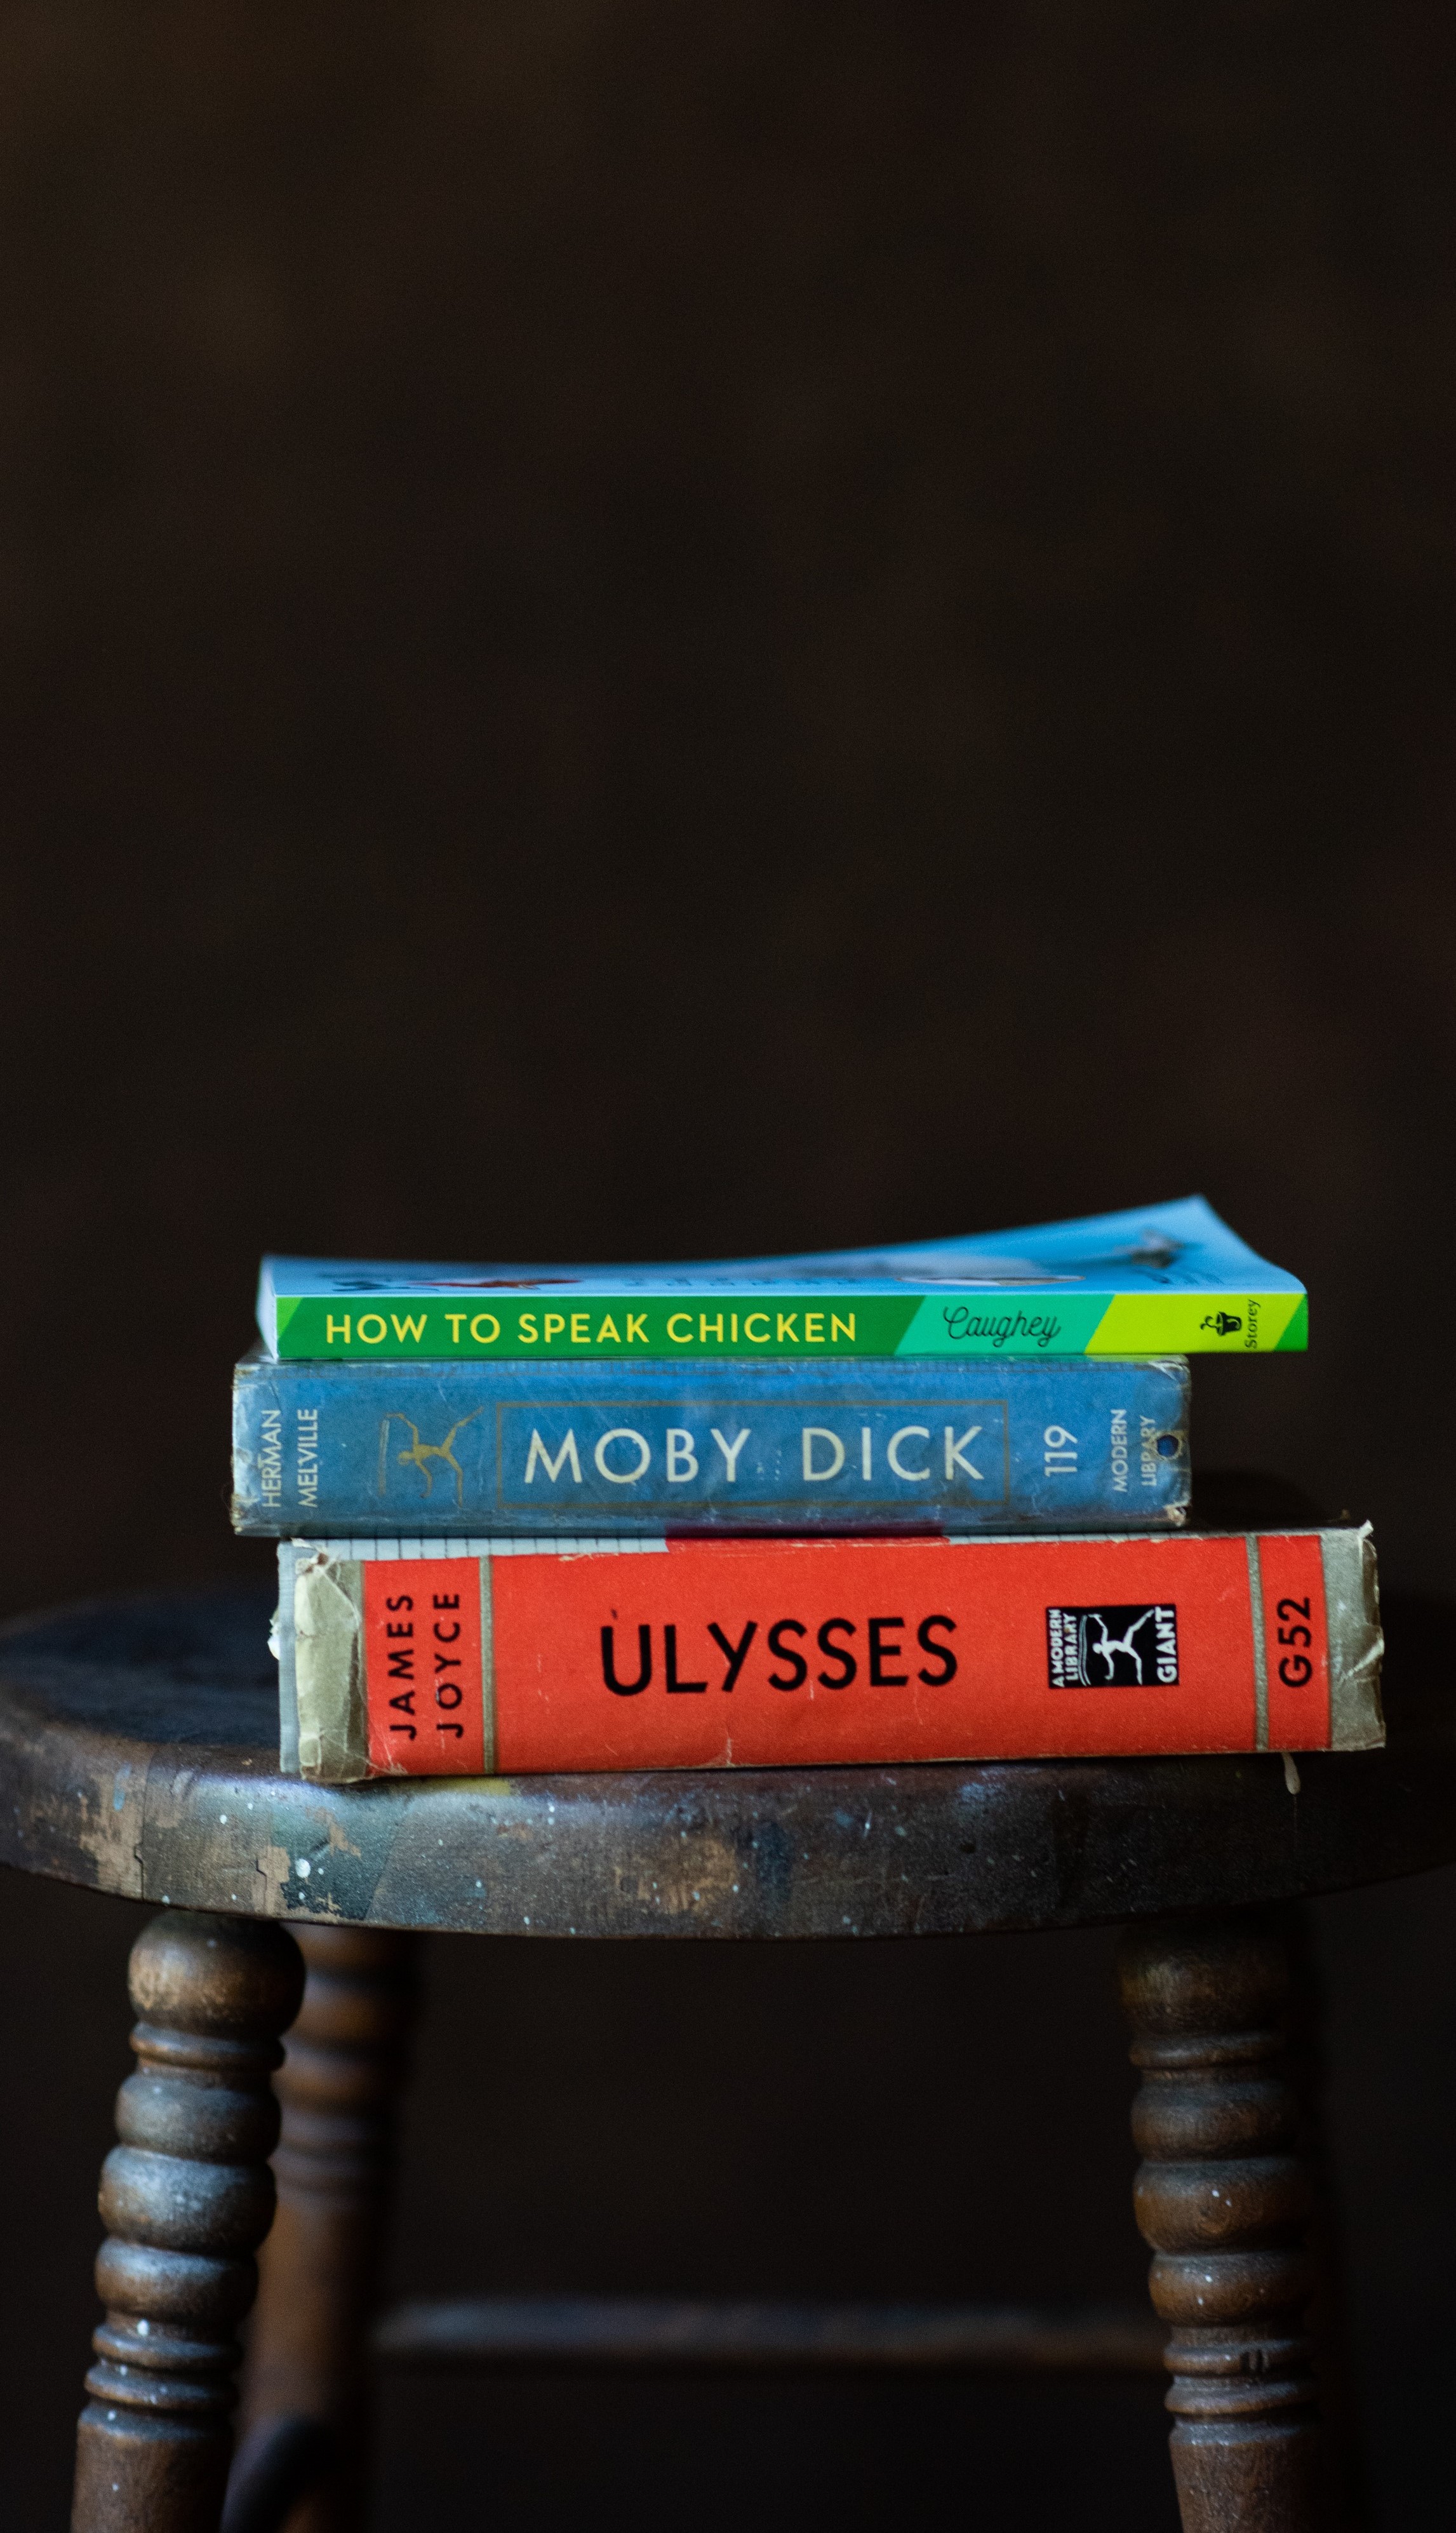 A stack of three books on a stool. The books are How To Speak Chicken by Caughey, Moby Dick by Herman Melville, and Ulysses by James Joyce.